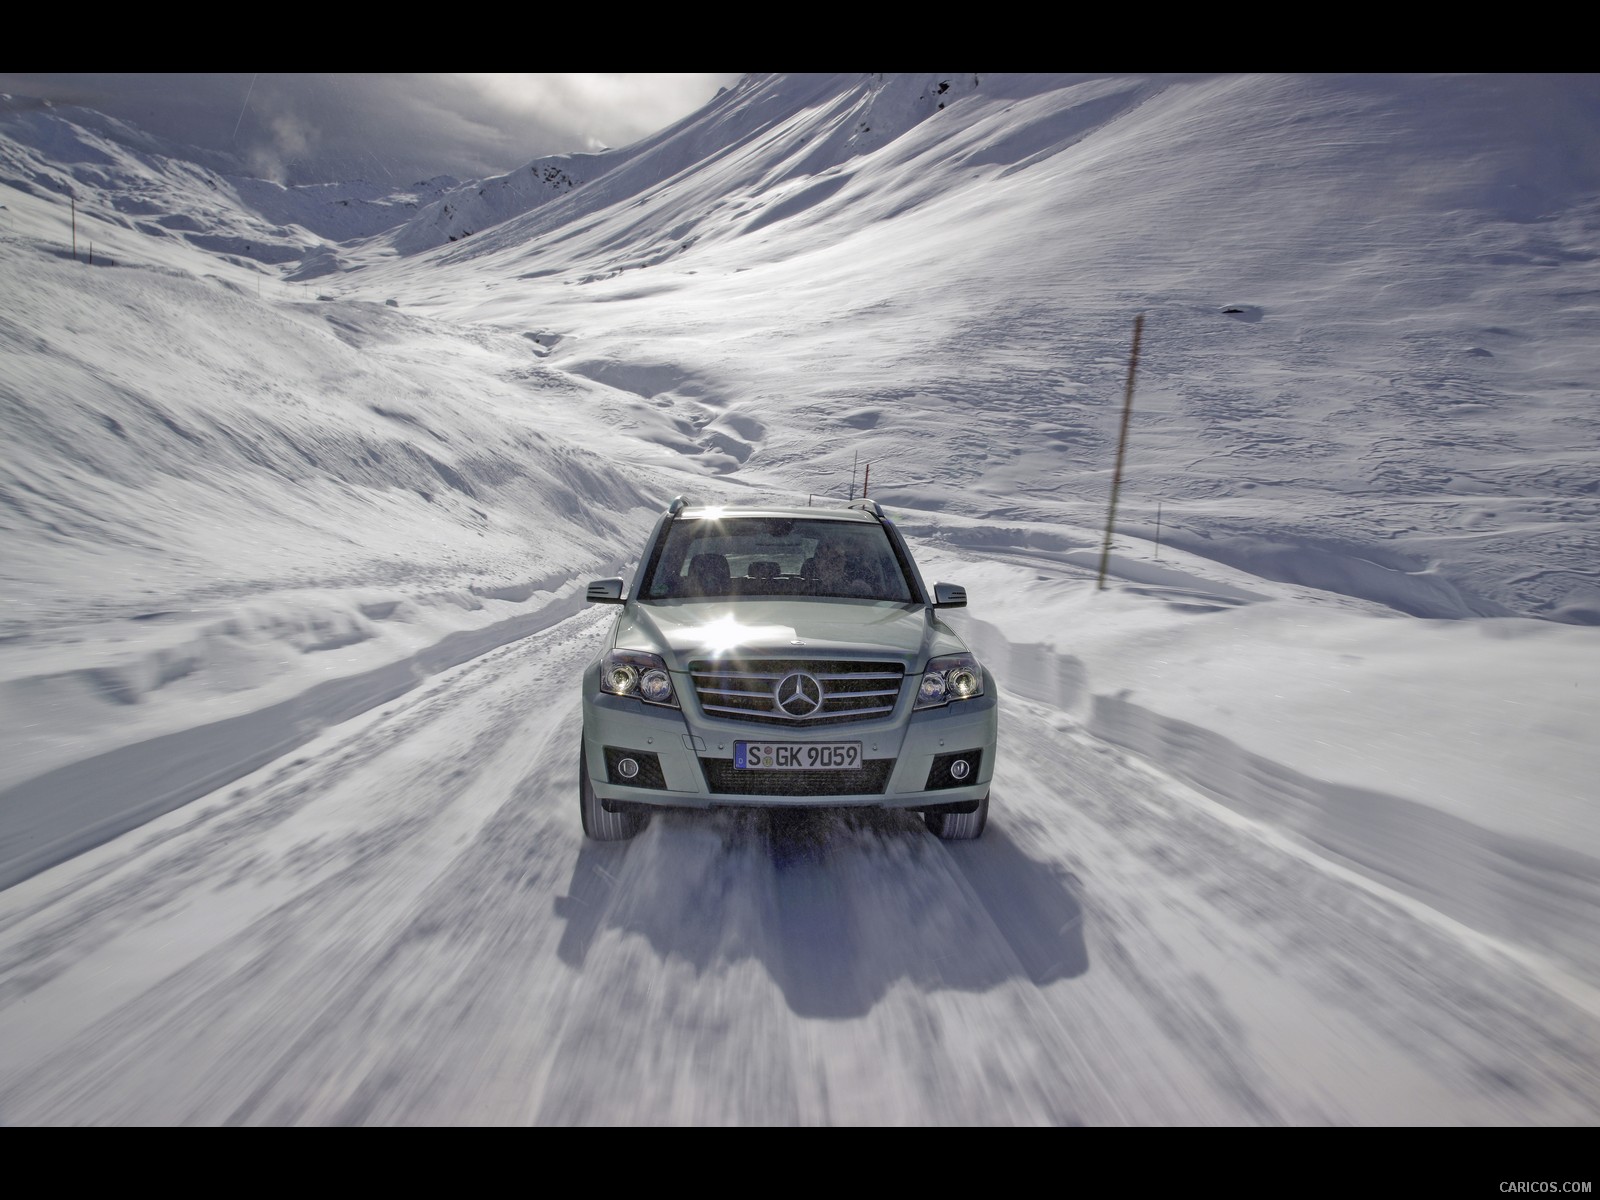 Mercedes-Benz GLK-Class - On Snow - Front Angle , #28 of 351